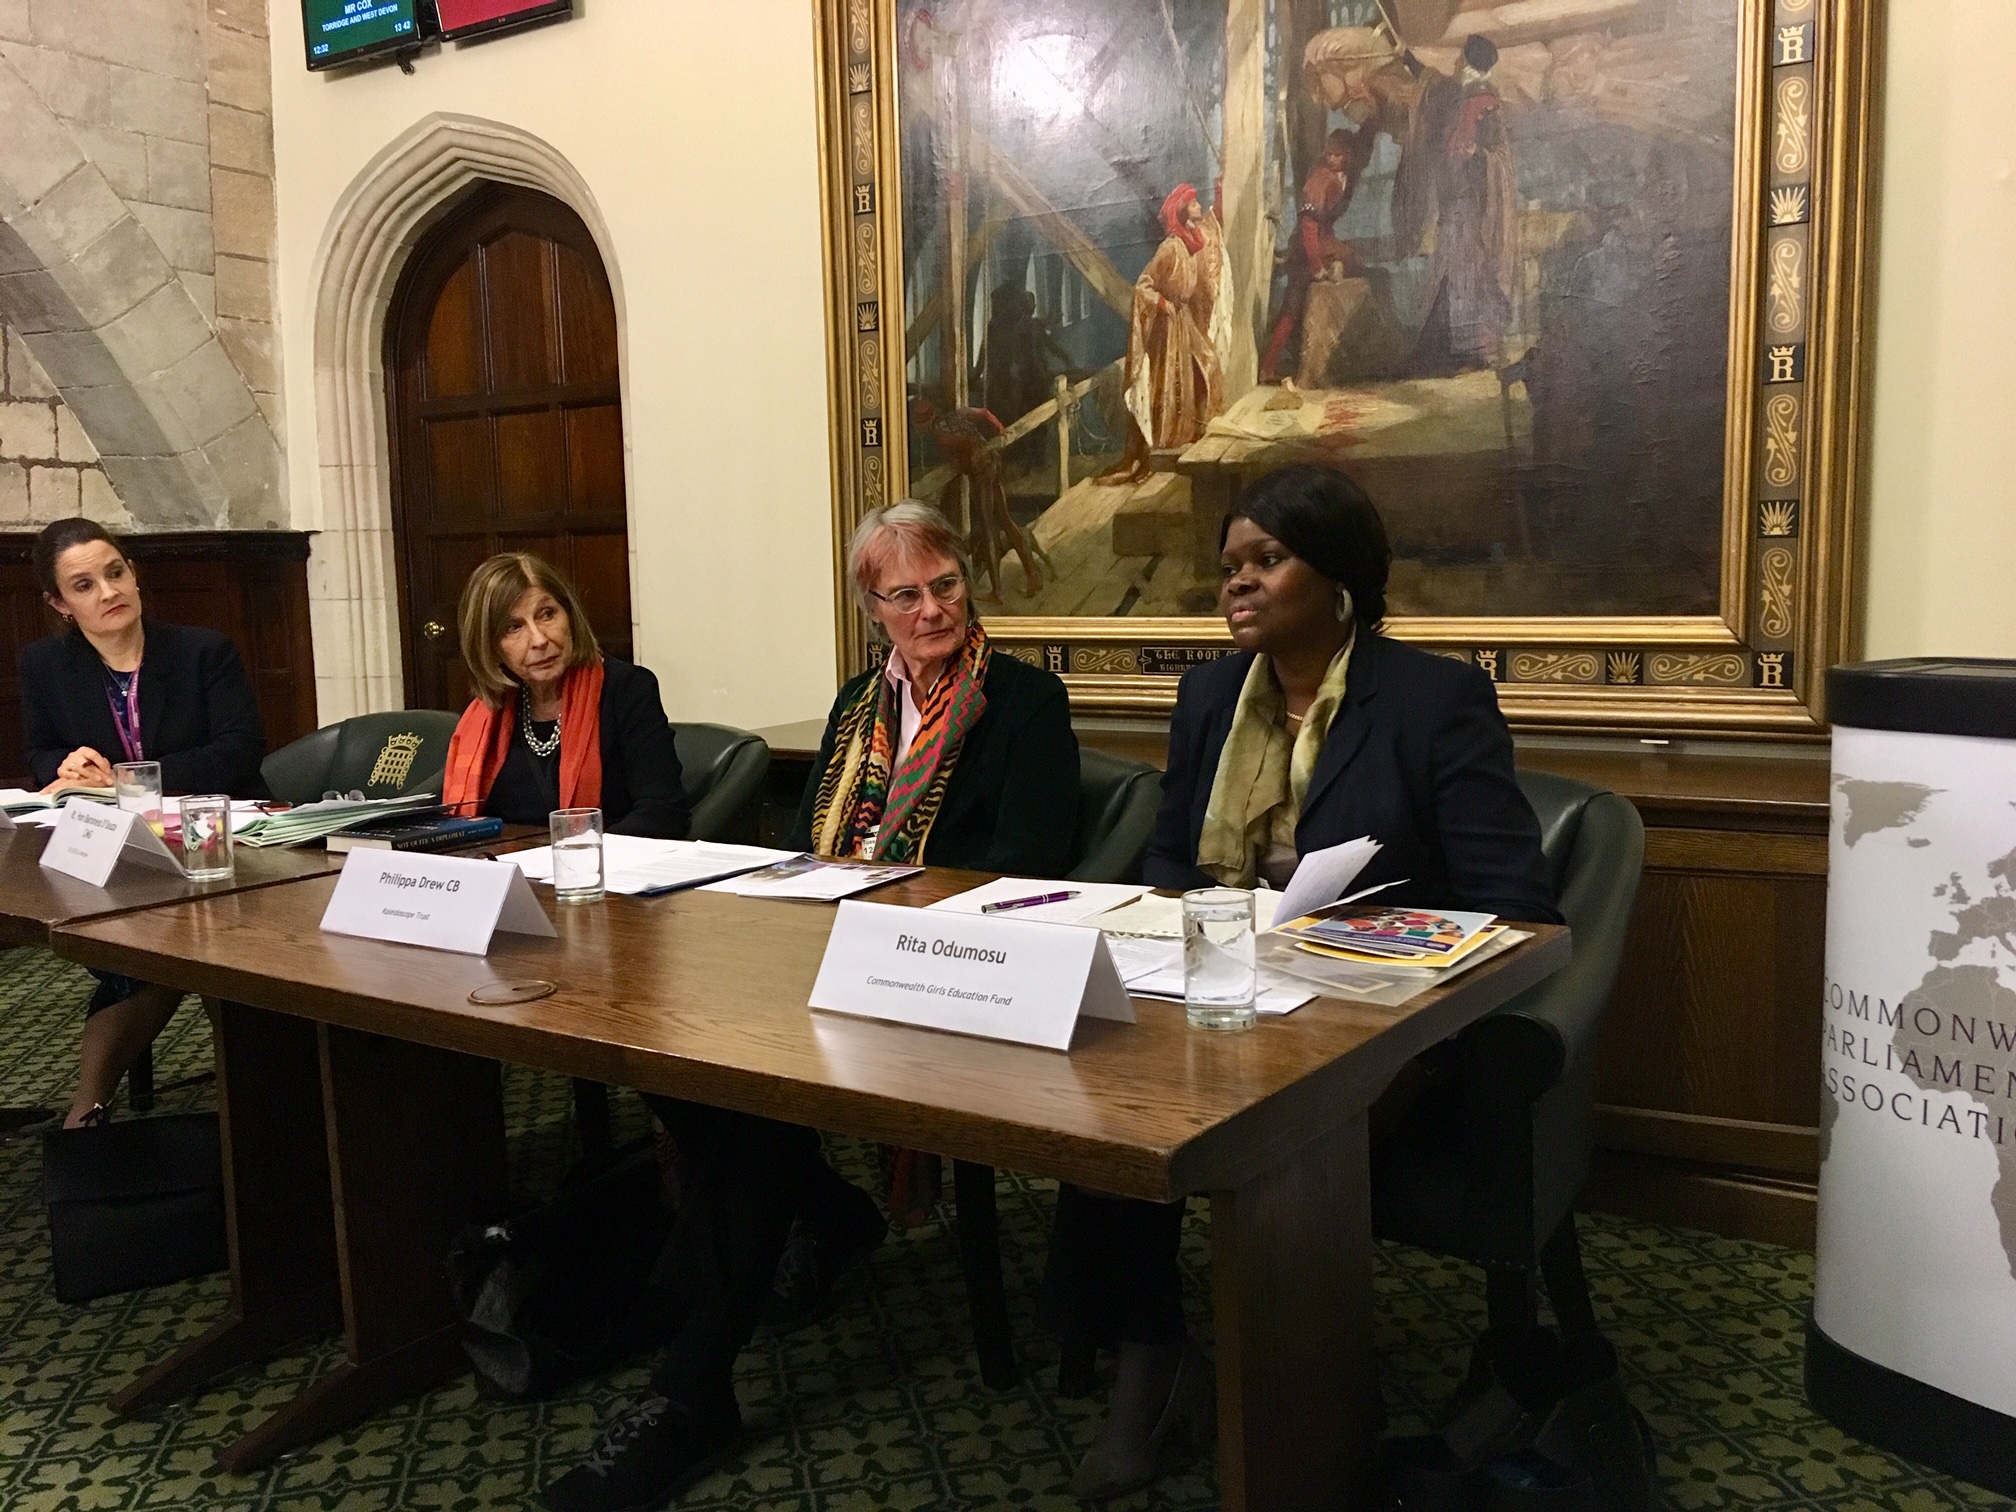 Panel discussion with Baroness D'Souza, Philippa Drew of the Kaleidoscope Trust, and Rita Odumosu of the Commonwealth Girls Education Fund